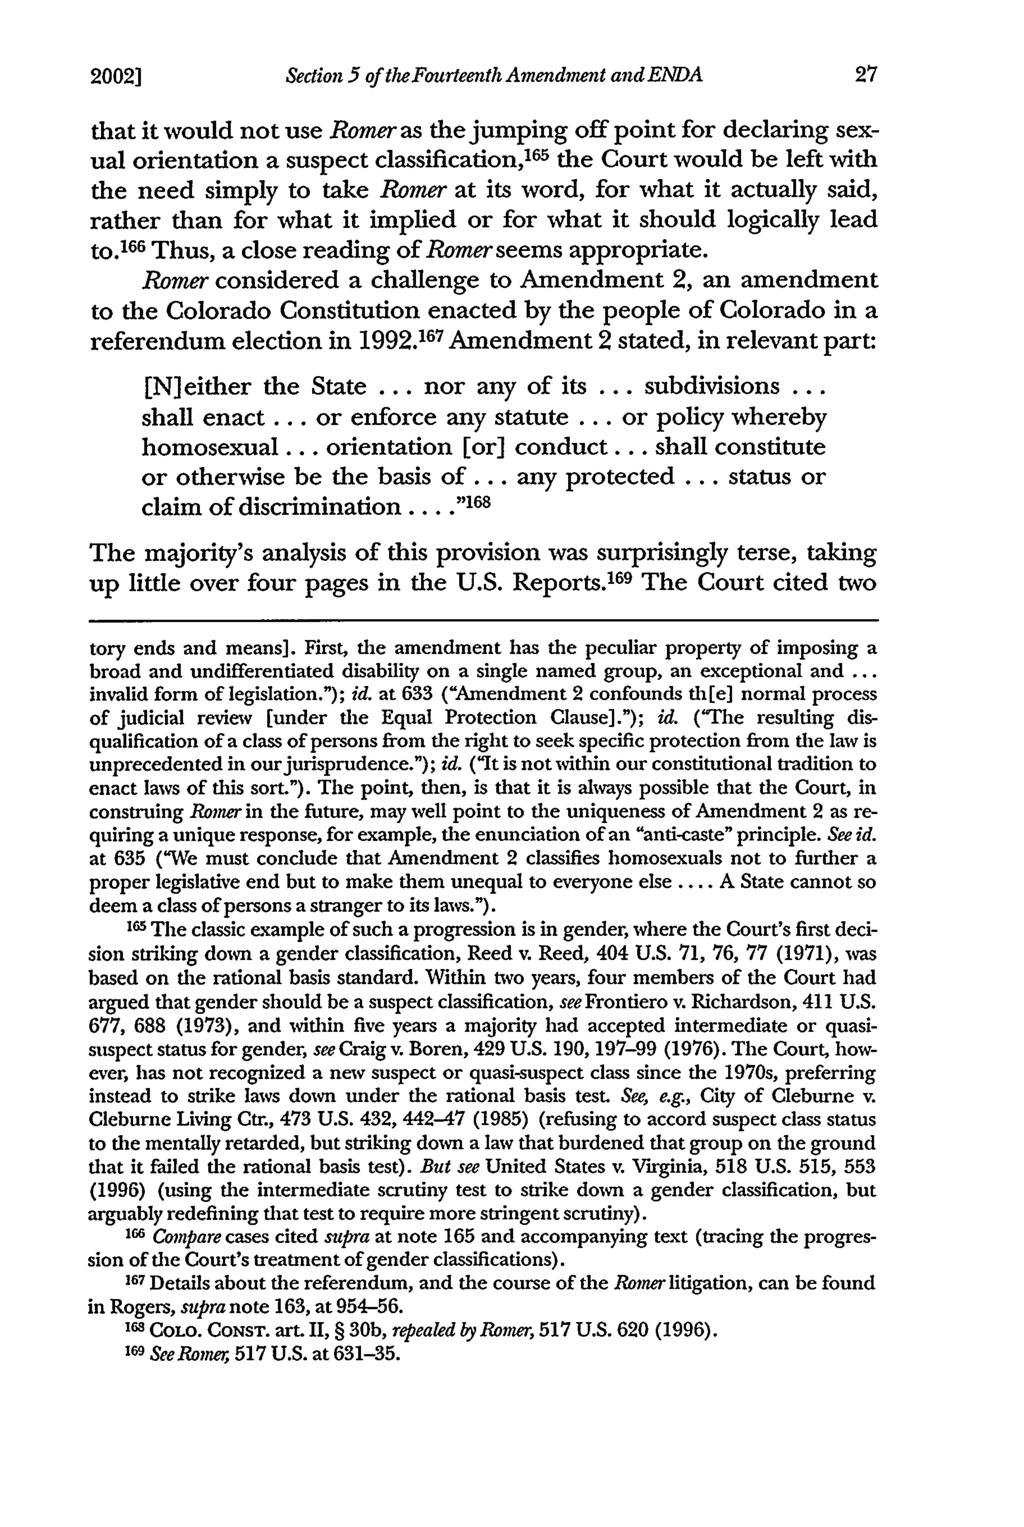 2002] Section 5 of thefourteenth Amendment and ENDA that it would not use Romer as the jumping off point for declaring sexual orientation a suspect classification, 65 the Court would be left with the